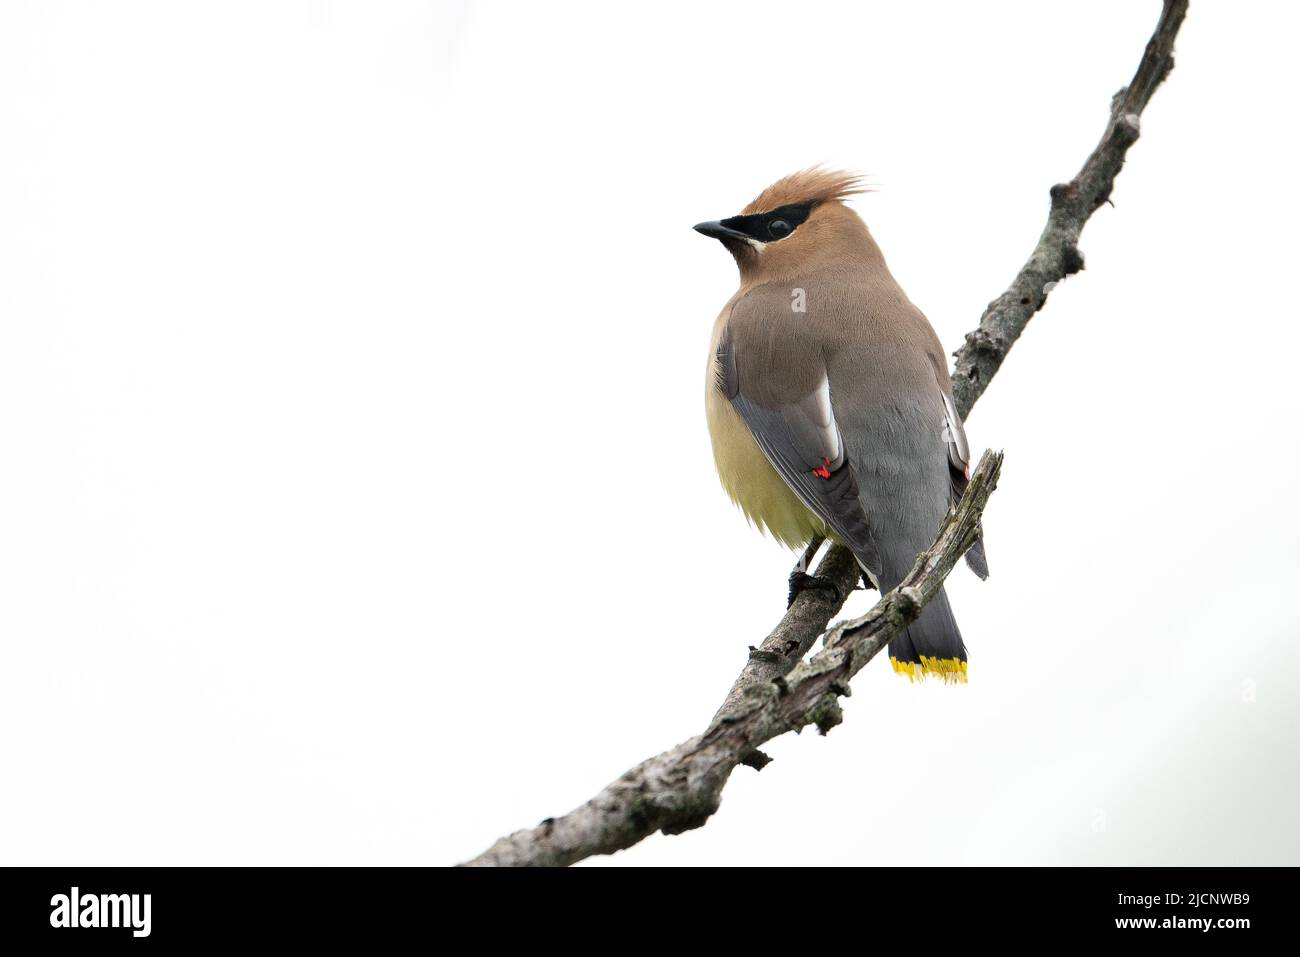 A cedar waxwing perched on a branch Stock Photo